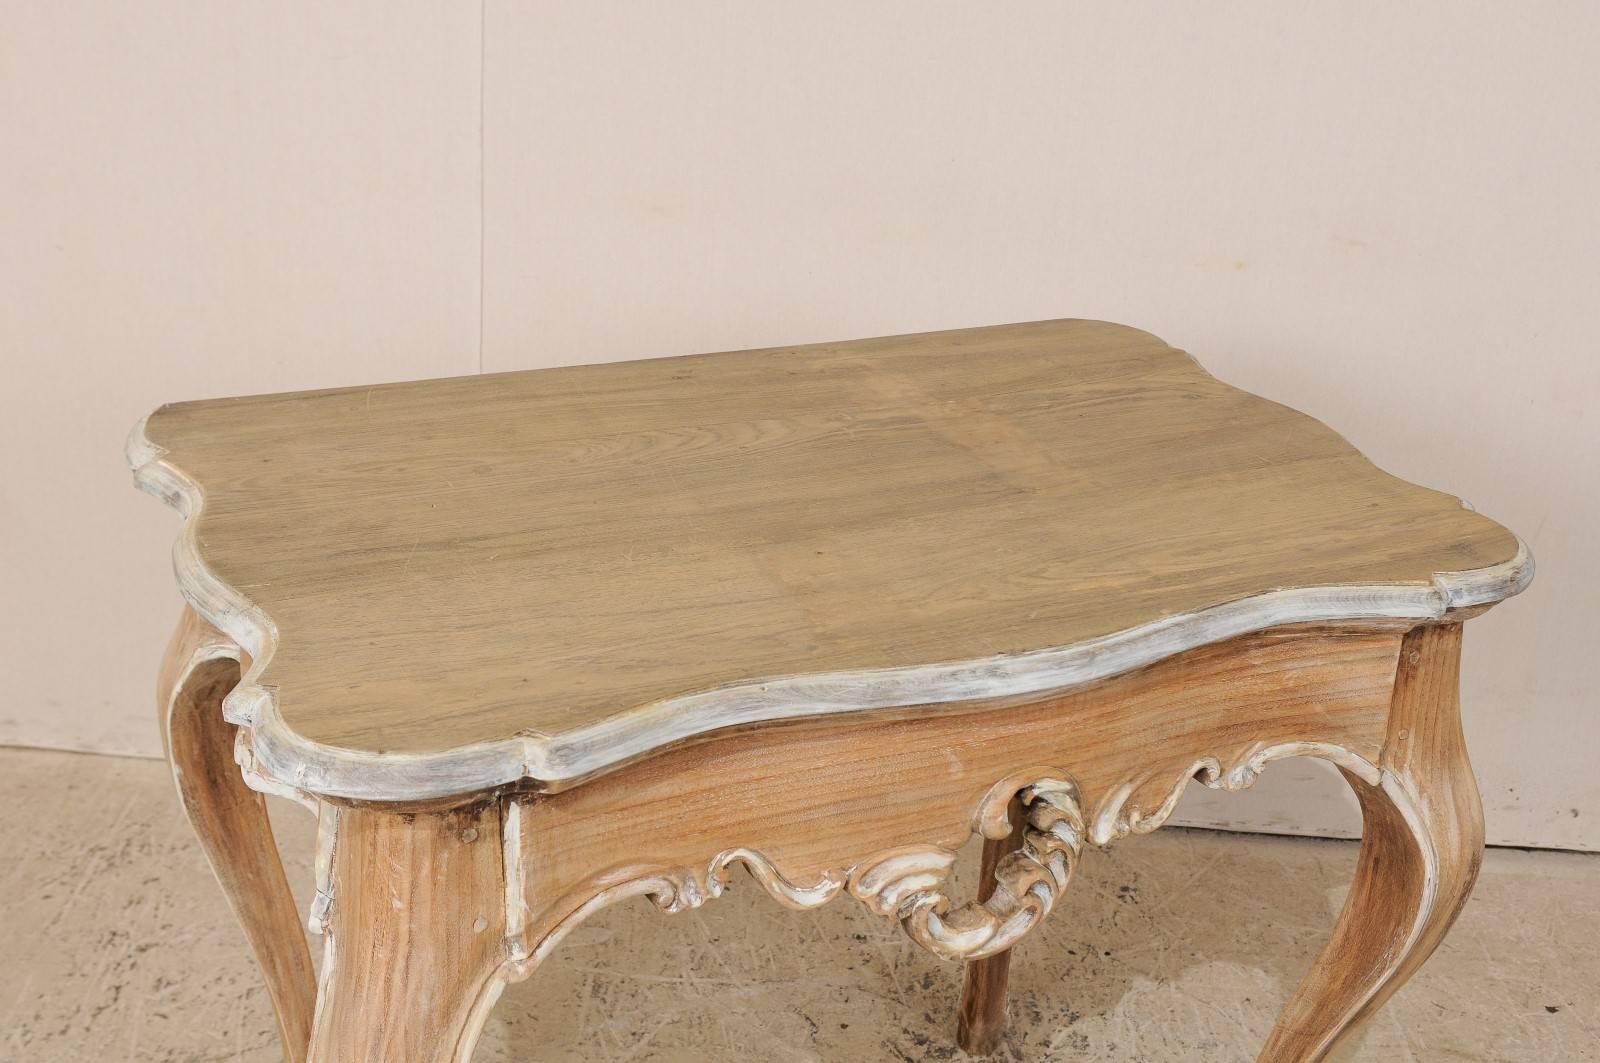 Lovely Brazilian Accent Table of Natural Wood with Painted Trim & Cabriole Legs 2